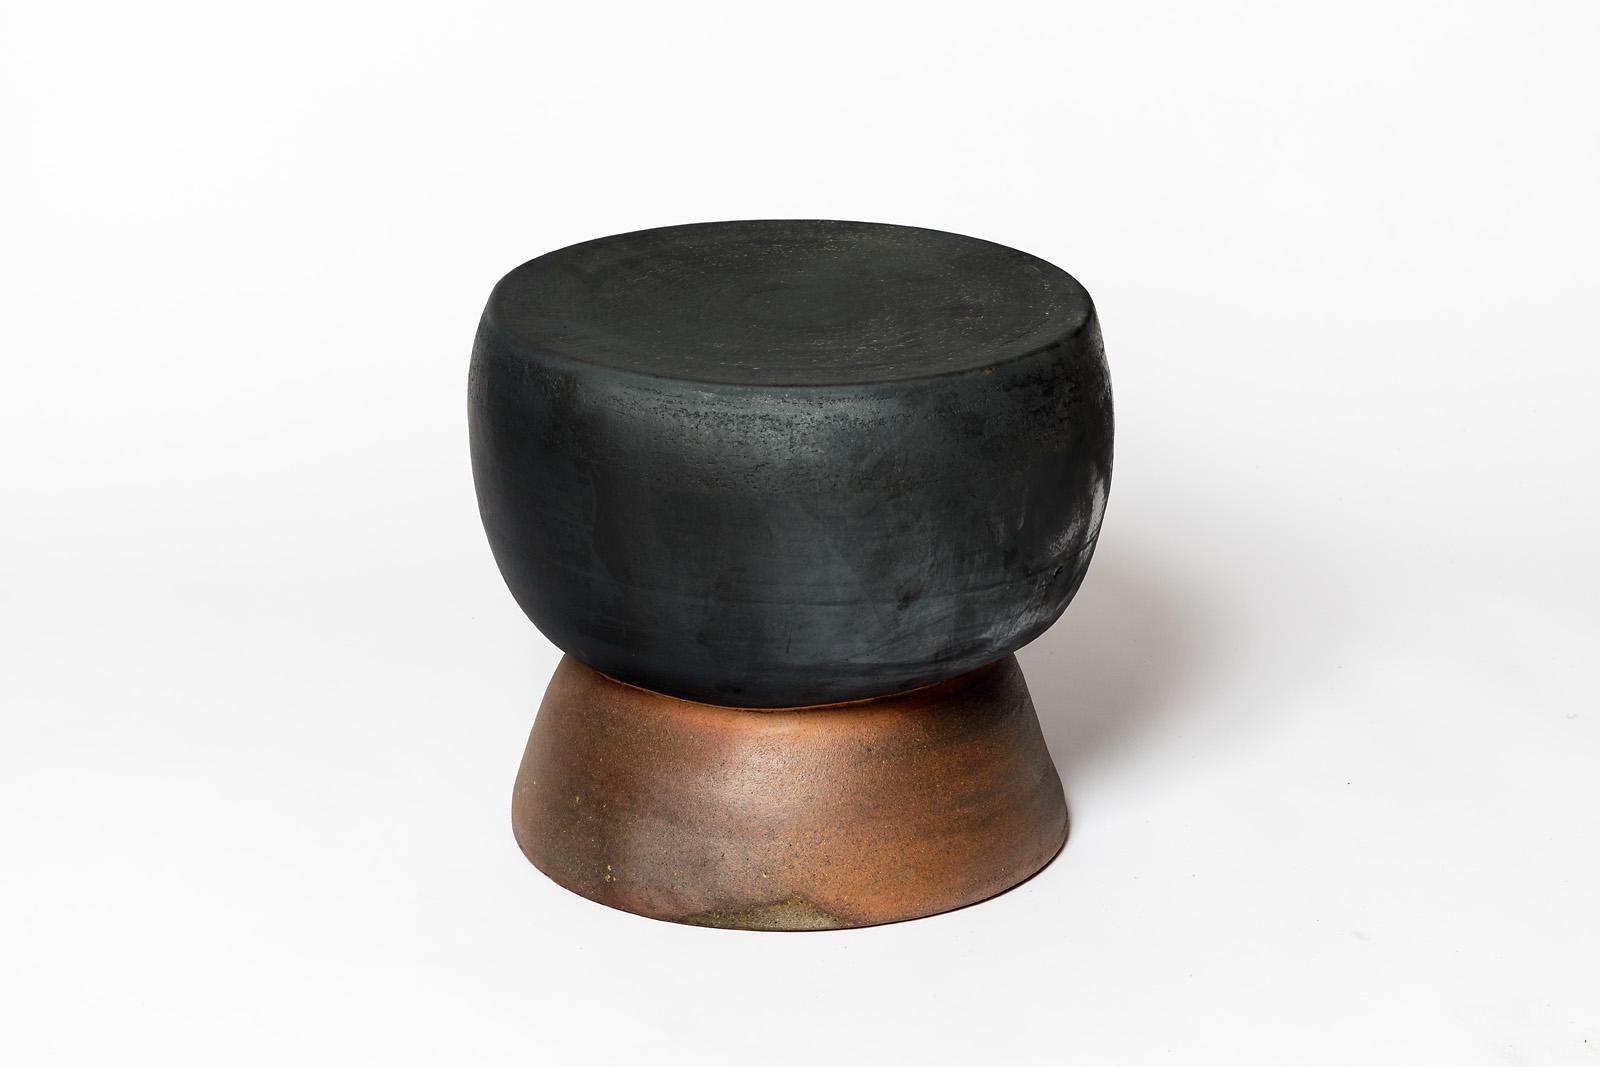 Black glazed ceramic stool or coffee table by Mia Jensen. 
Artist signature under the base. 2024.
H : 13.8’ x 14.5’ inches.